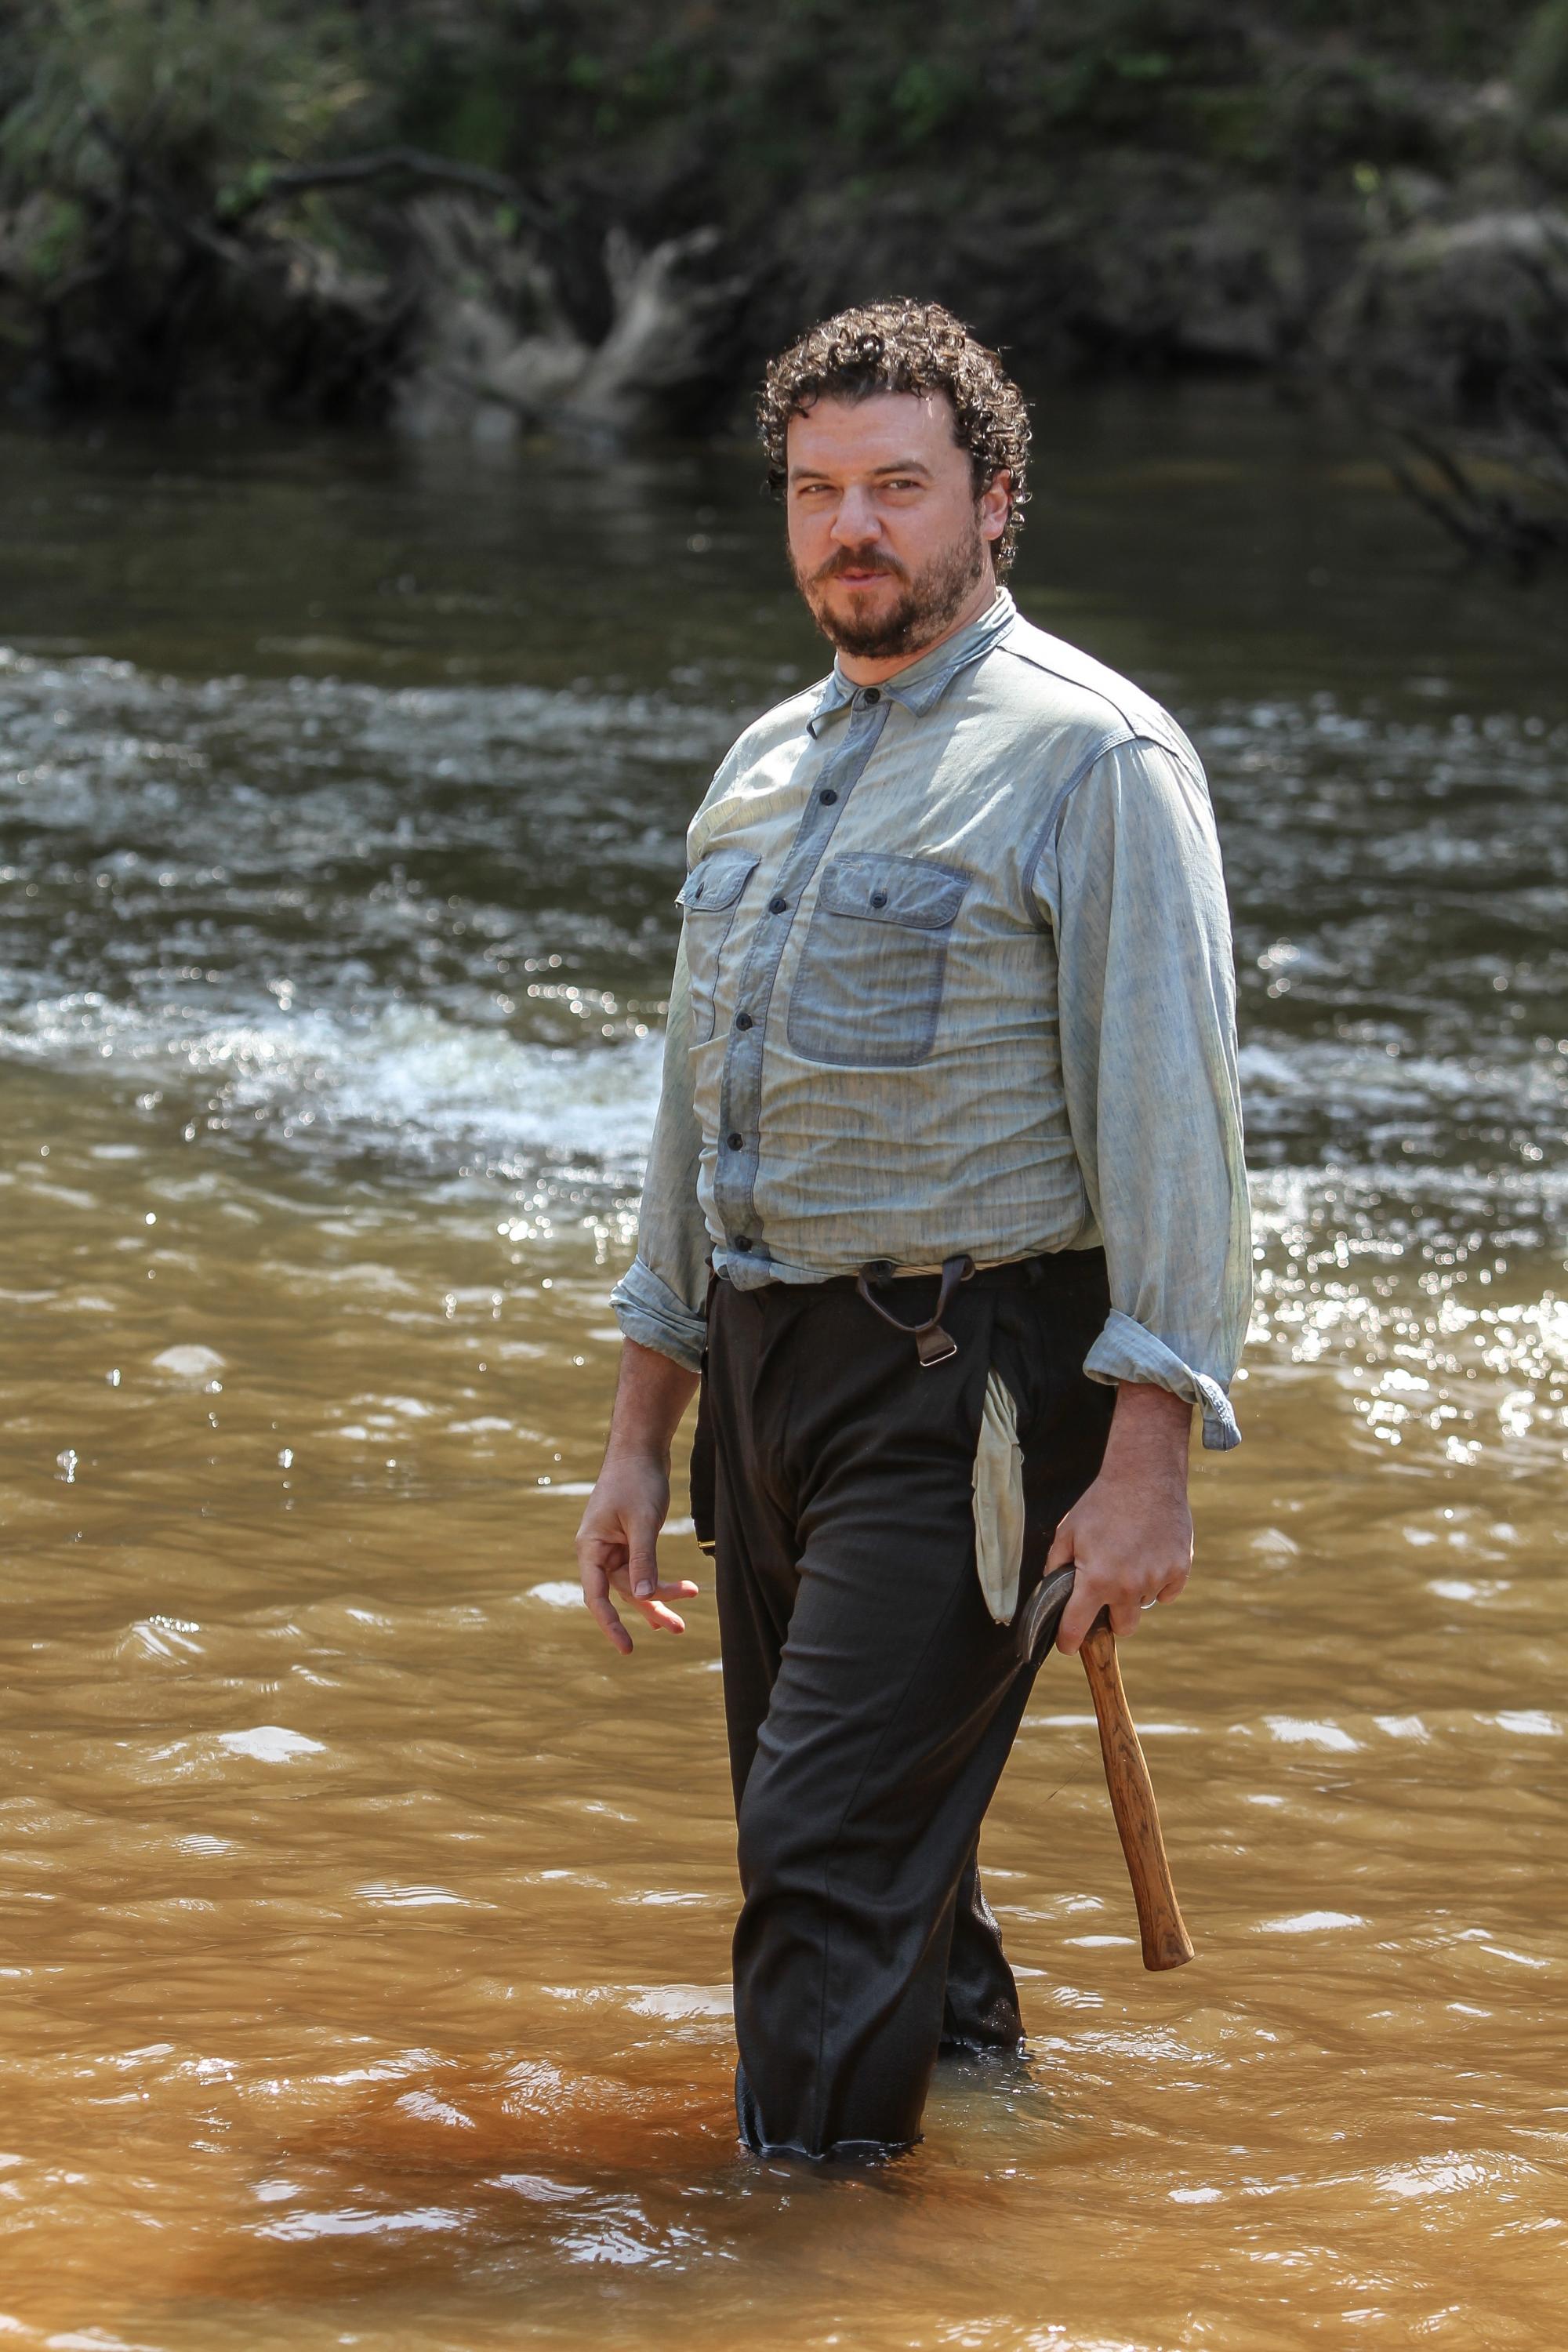 Danny McBride as Vernon Tull in As I Lay Dying